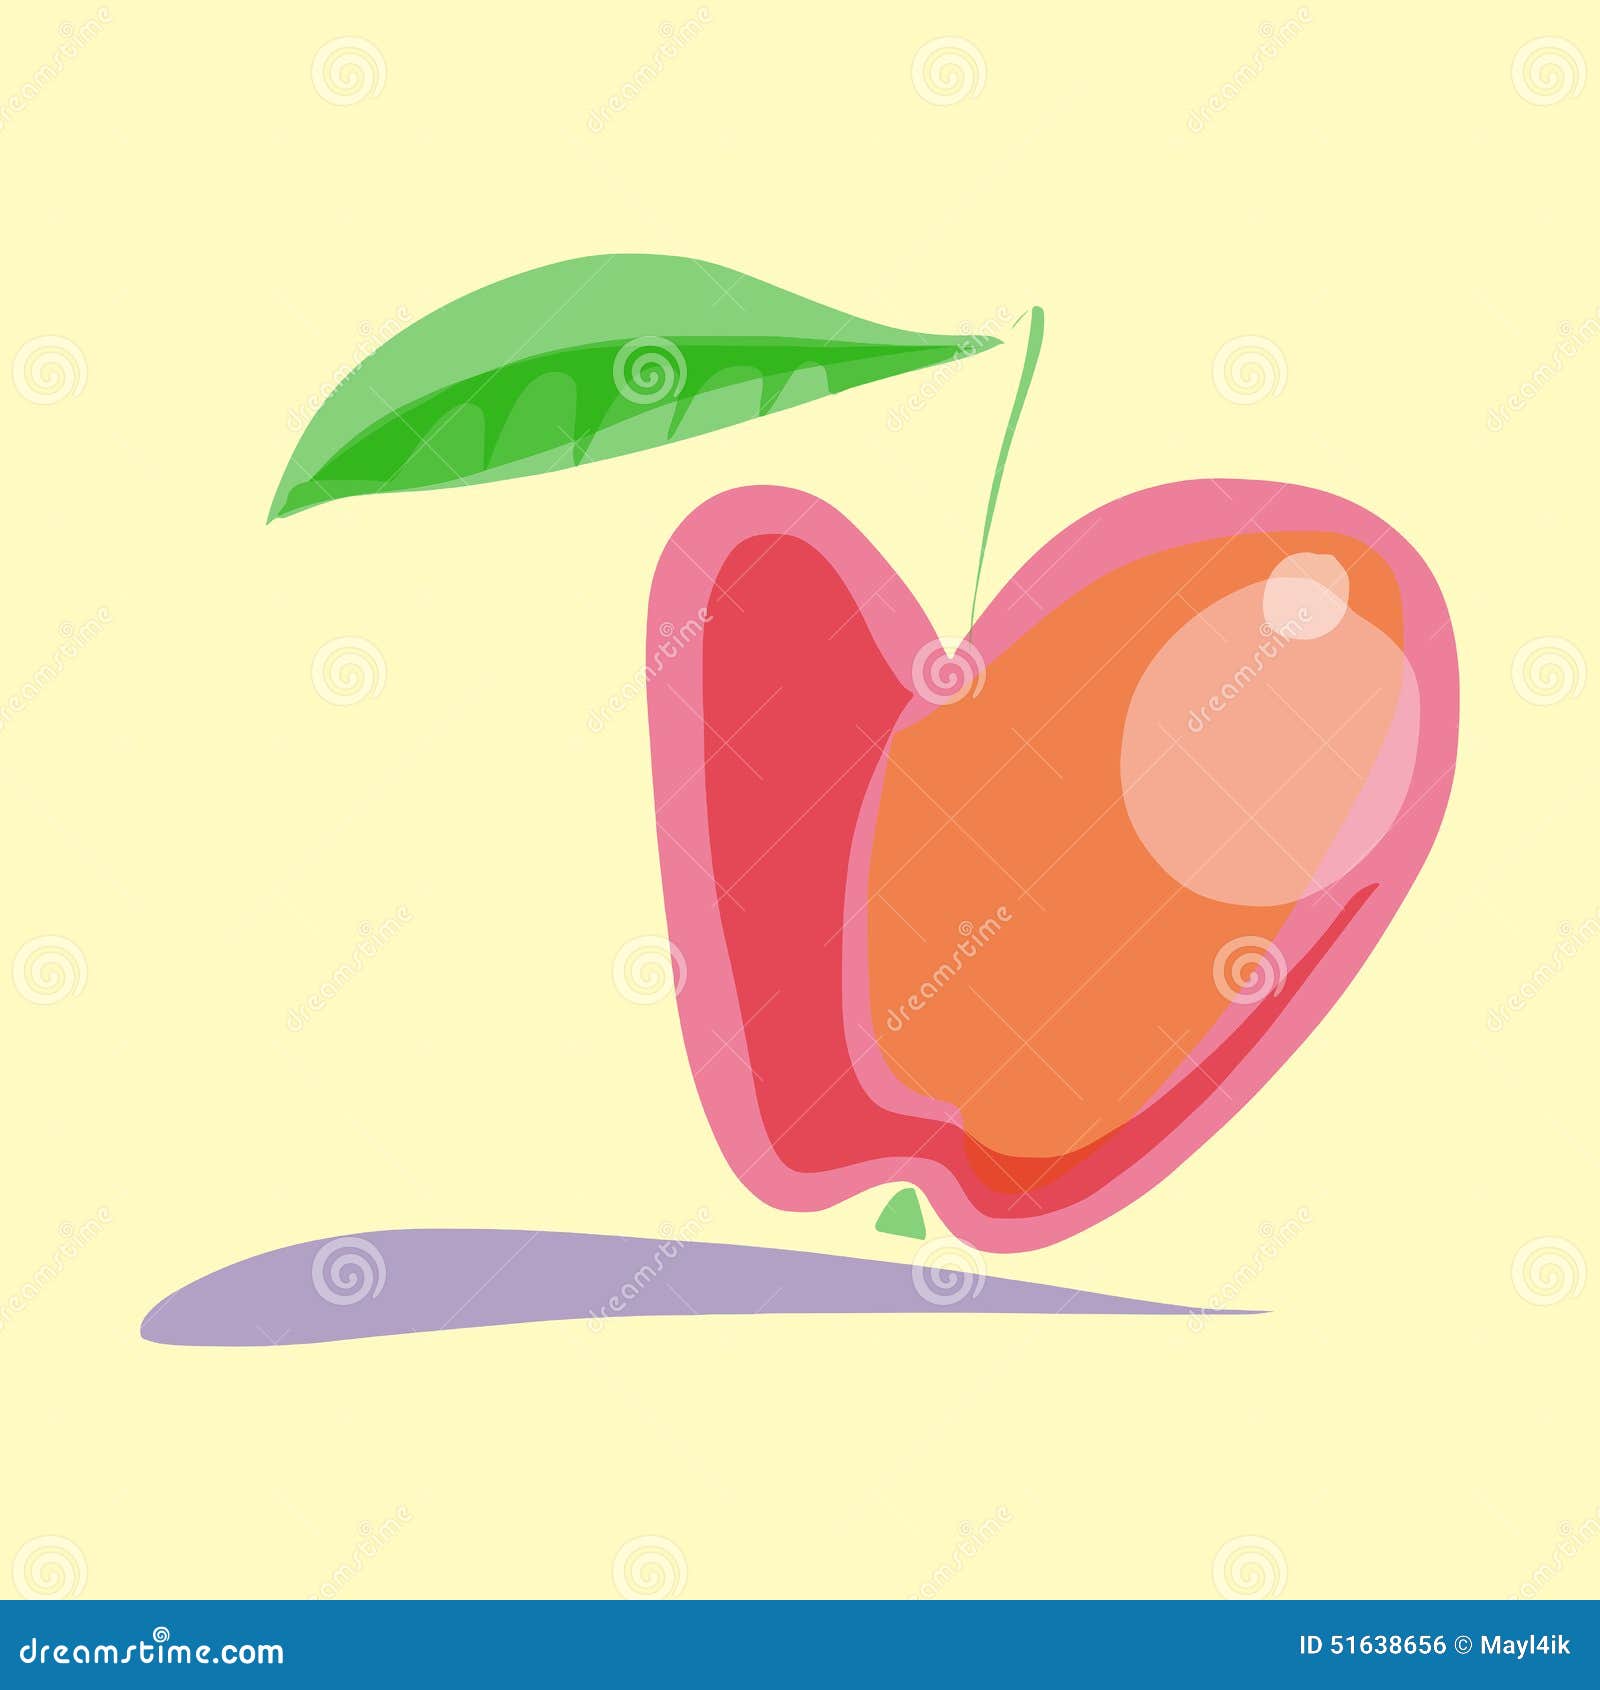 Juicy red apple stock vector. Illustration of design - 51638656